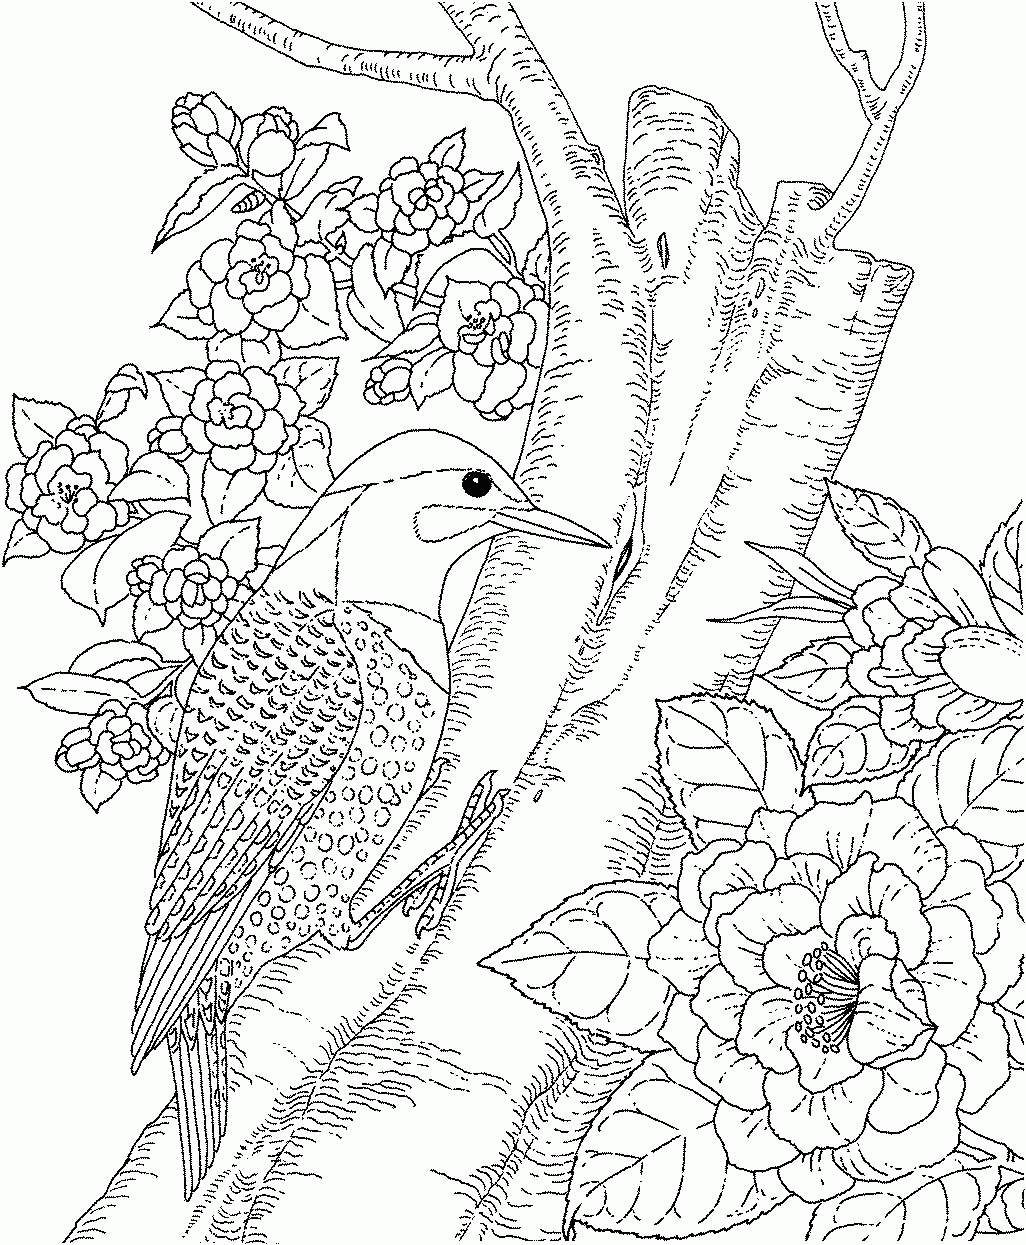 Backyard Animals And Nature Coloring Books Free Coloring Pages - Free Printable Nature Coloring Pages